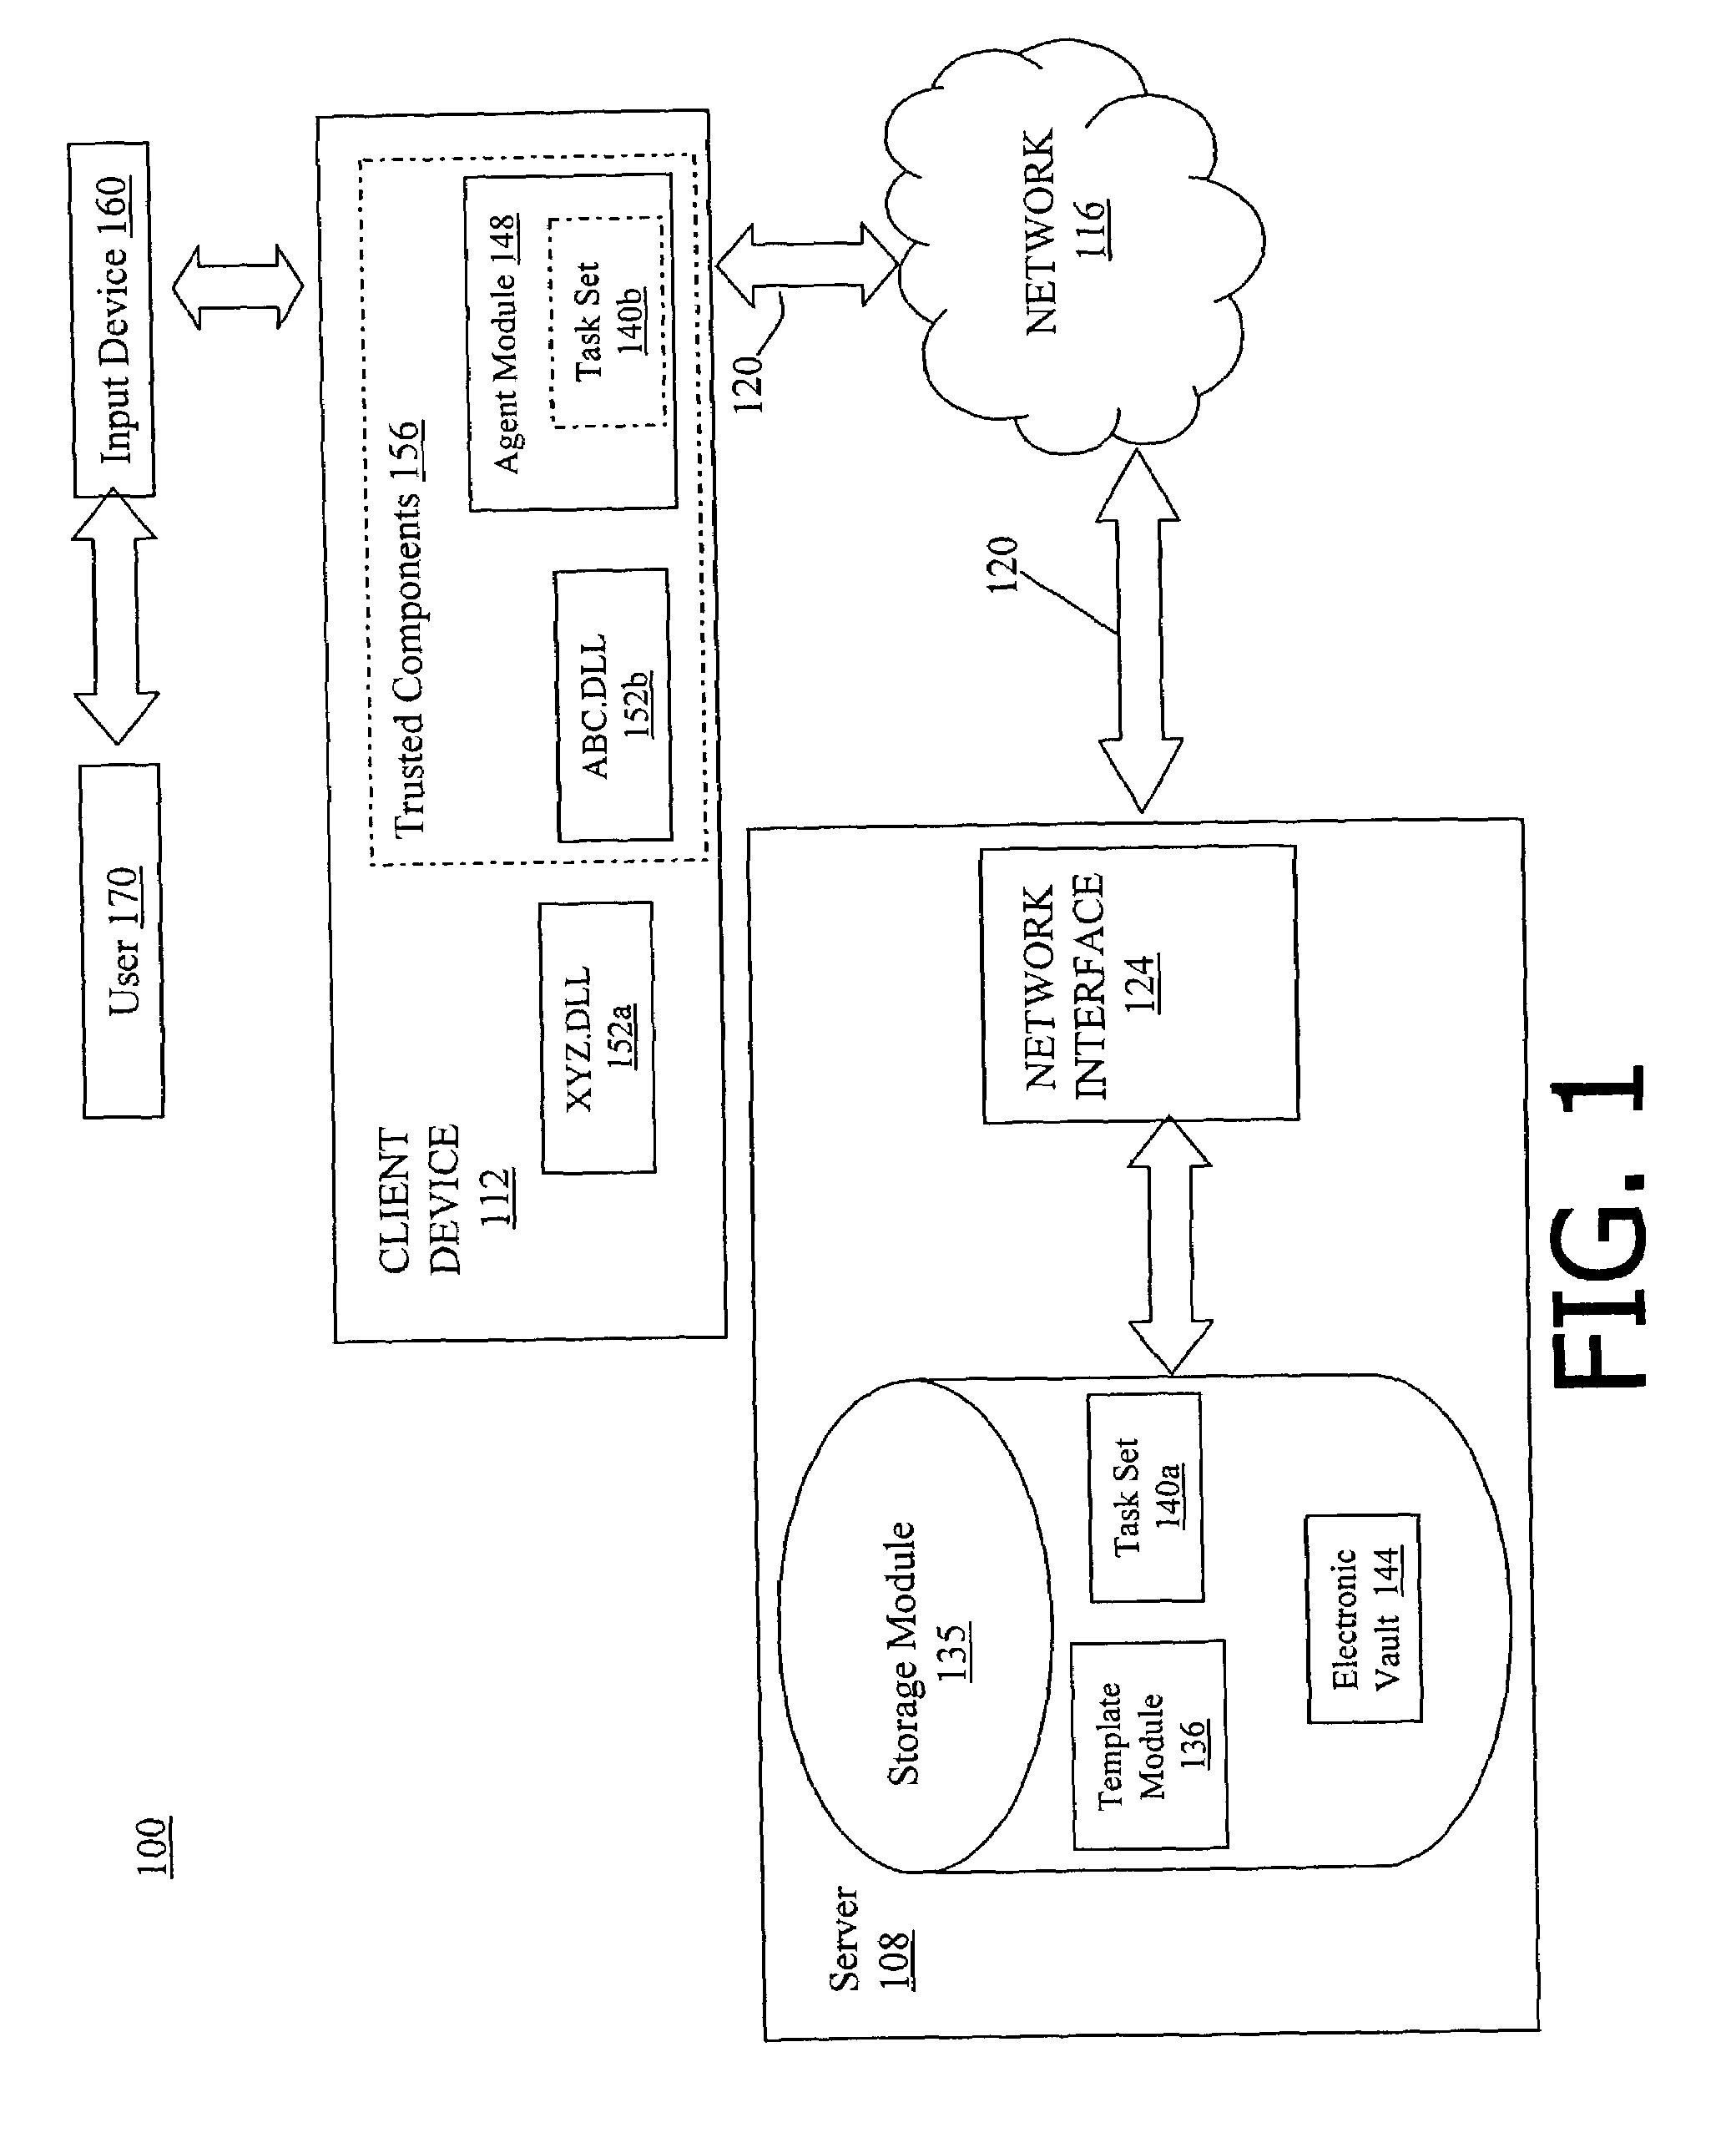 Biometric authentication for remote initiation of actions and services